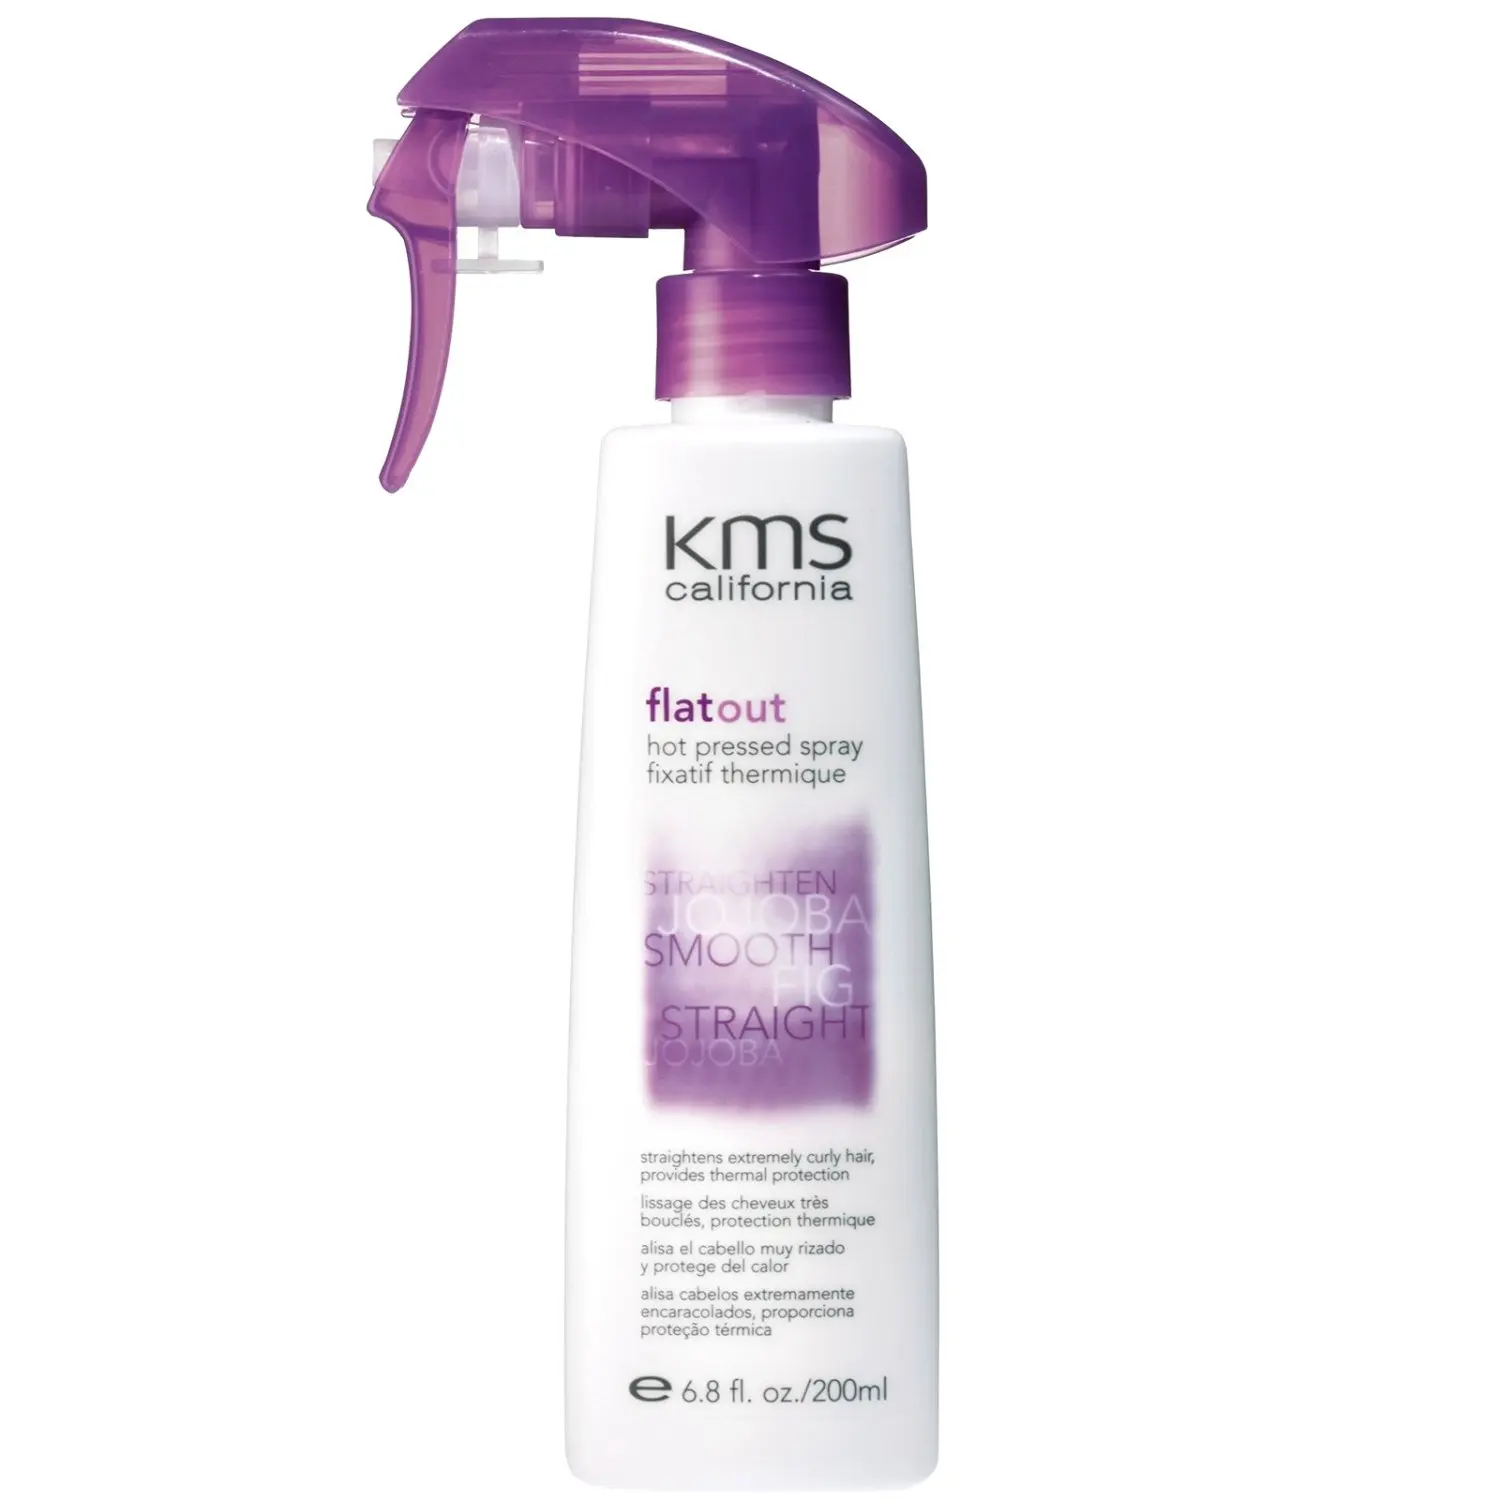 Cheap Kms Spray Find Kms Spray Deals On Line At Alibaba Com